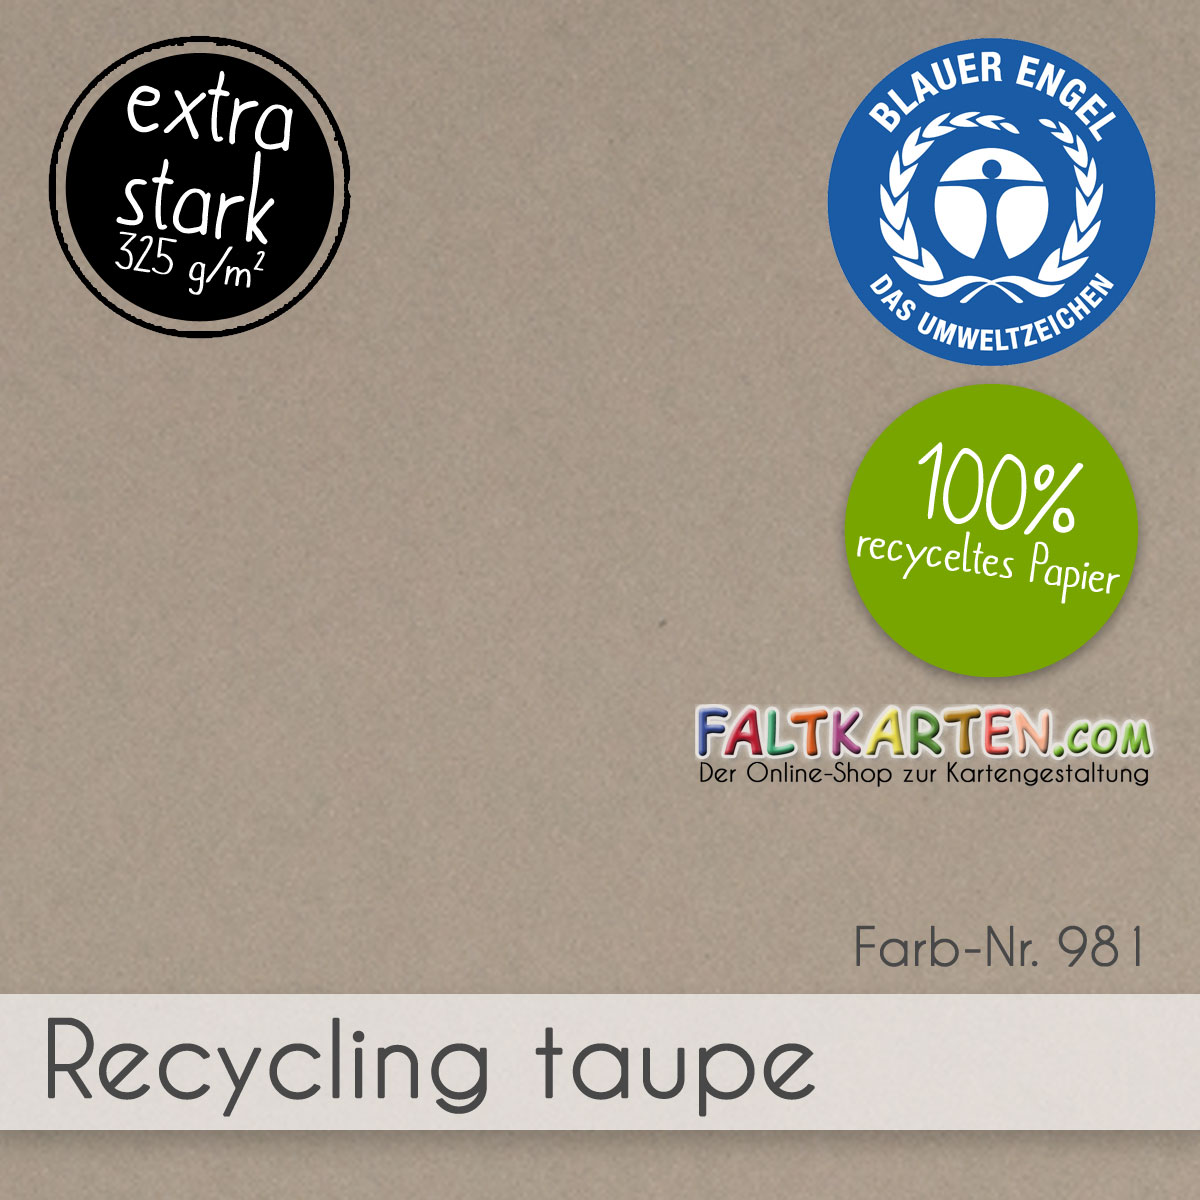 Cardstock Recycling Taupe 325g/m² 5er